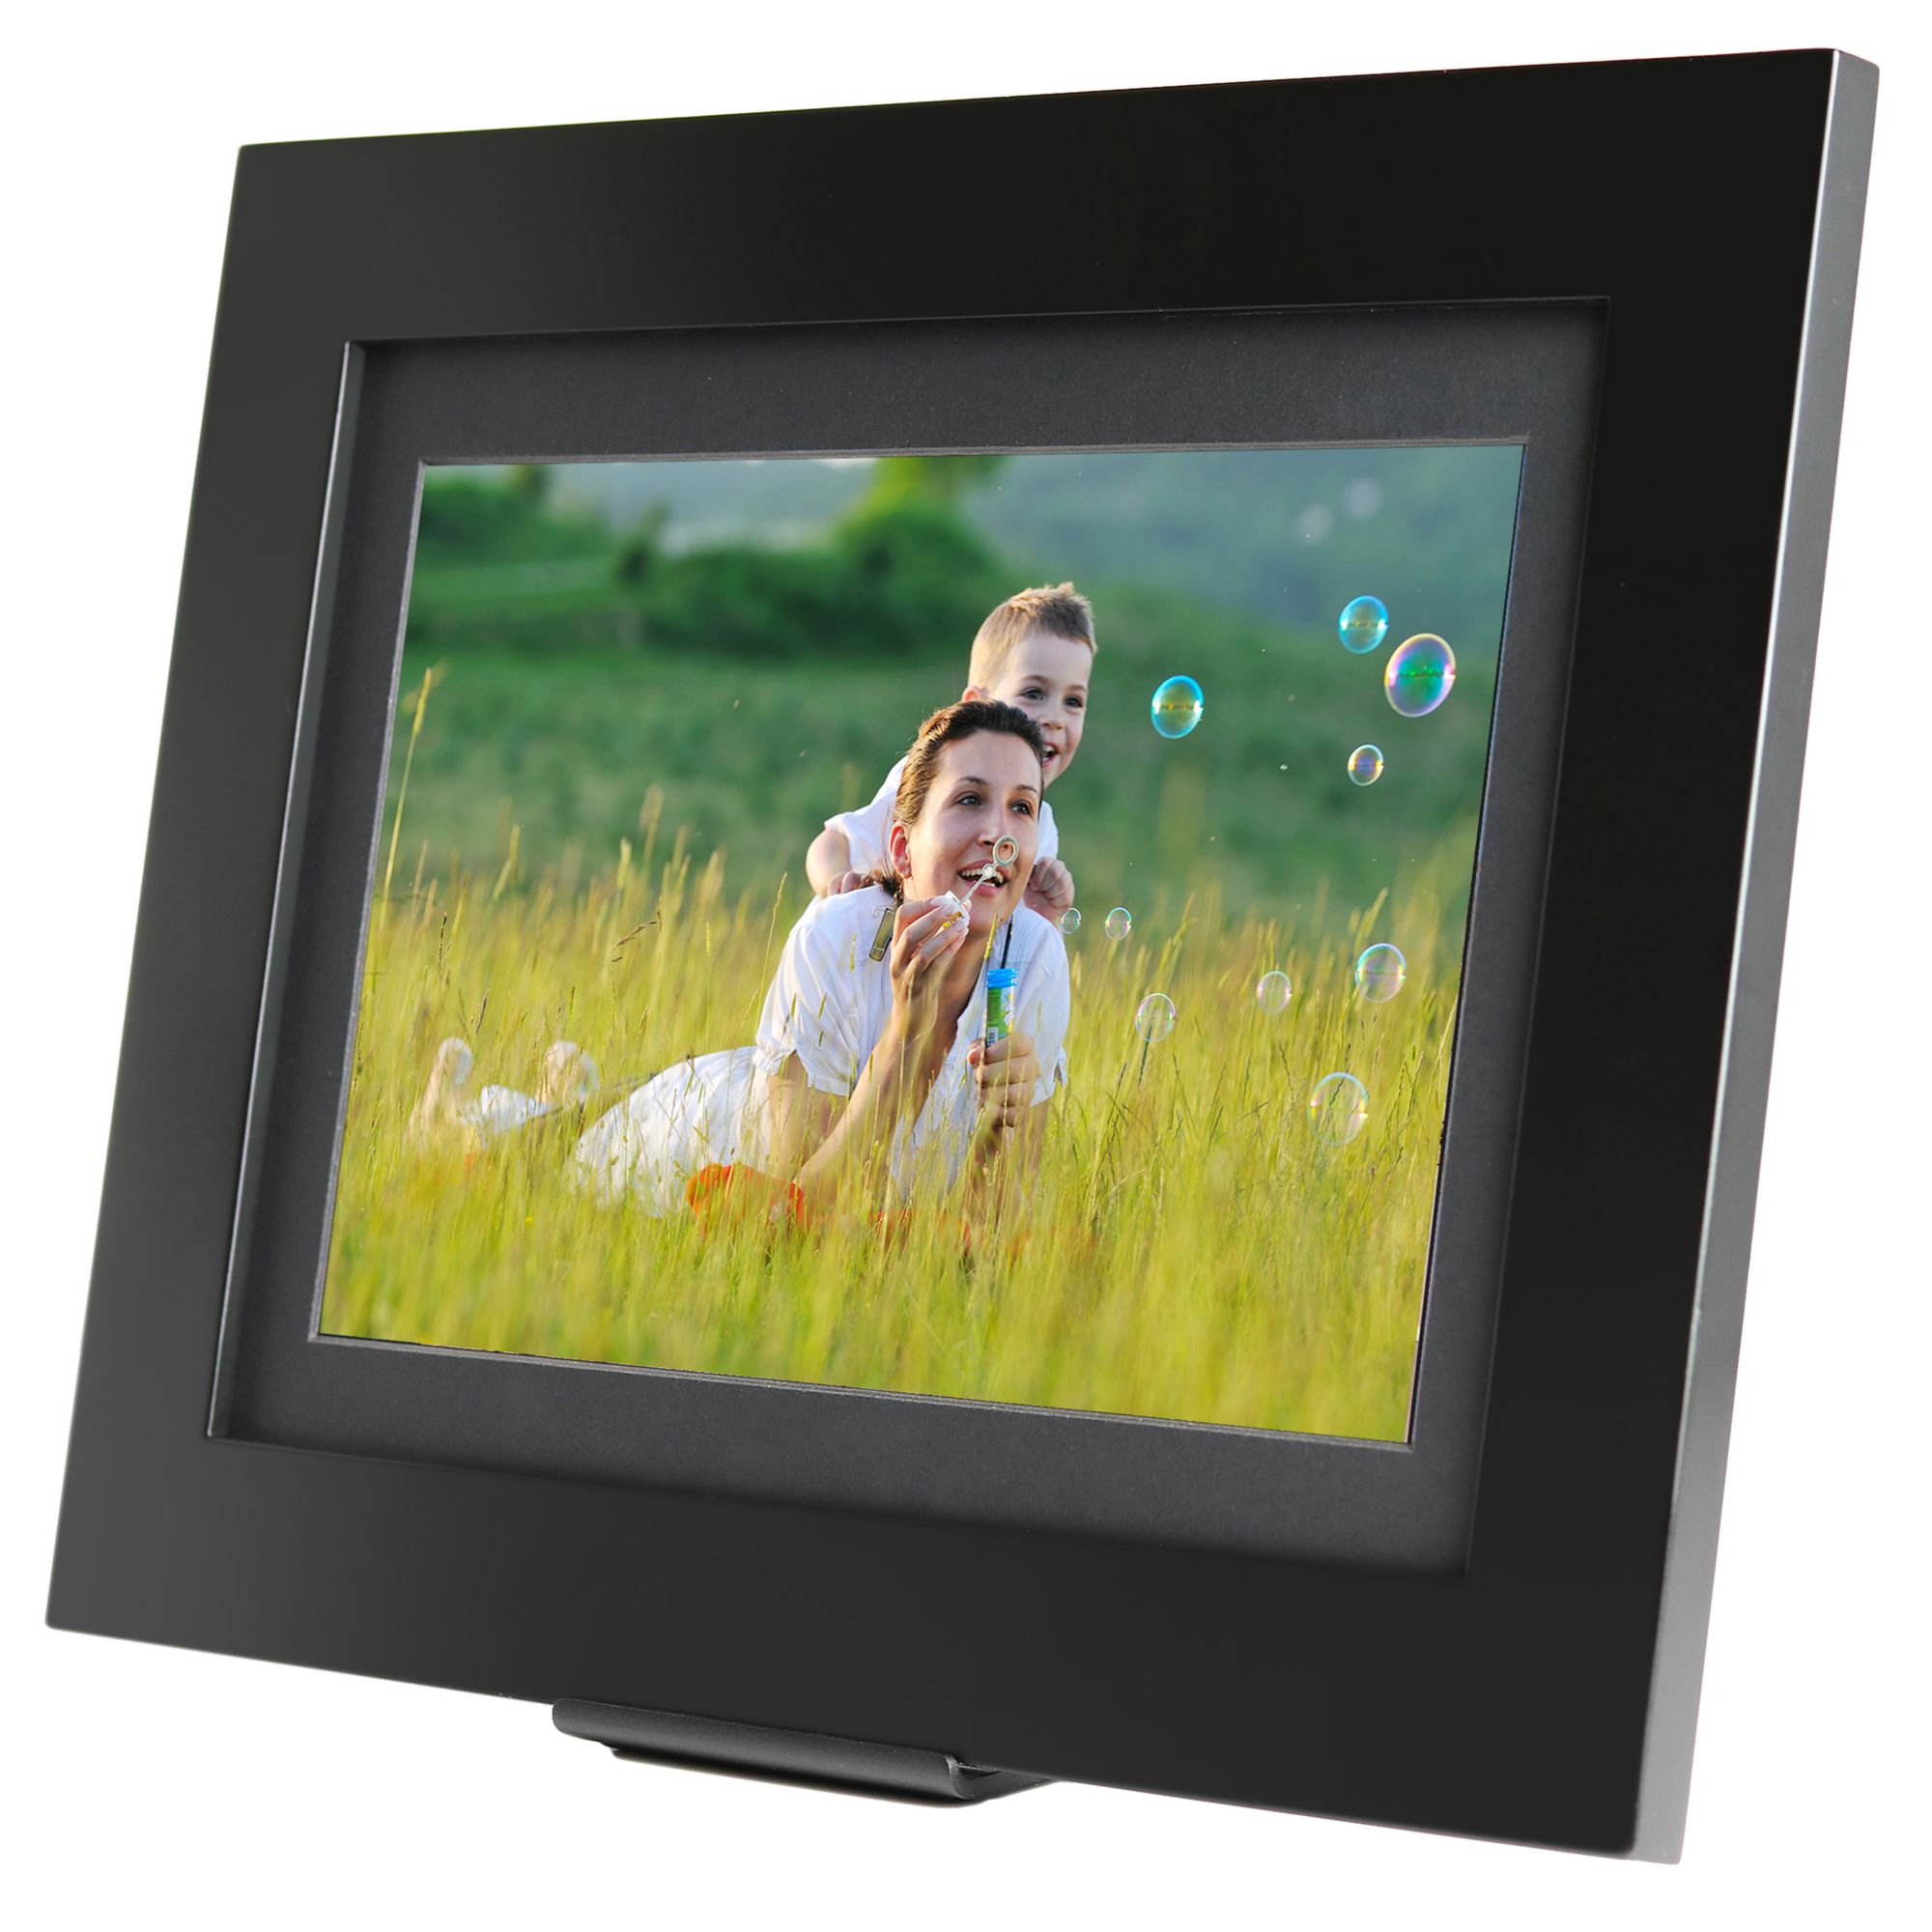 Simply FSM010BL Smart Home PhotoShare Friends and Family 10.1 Smart Frame